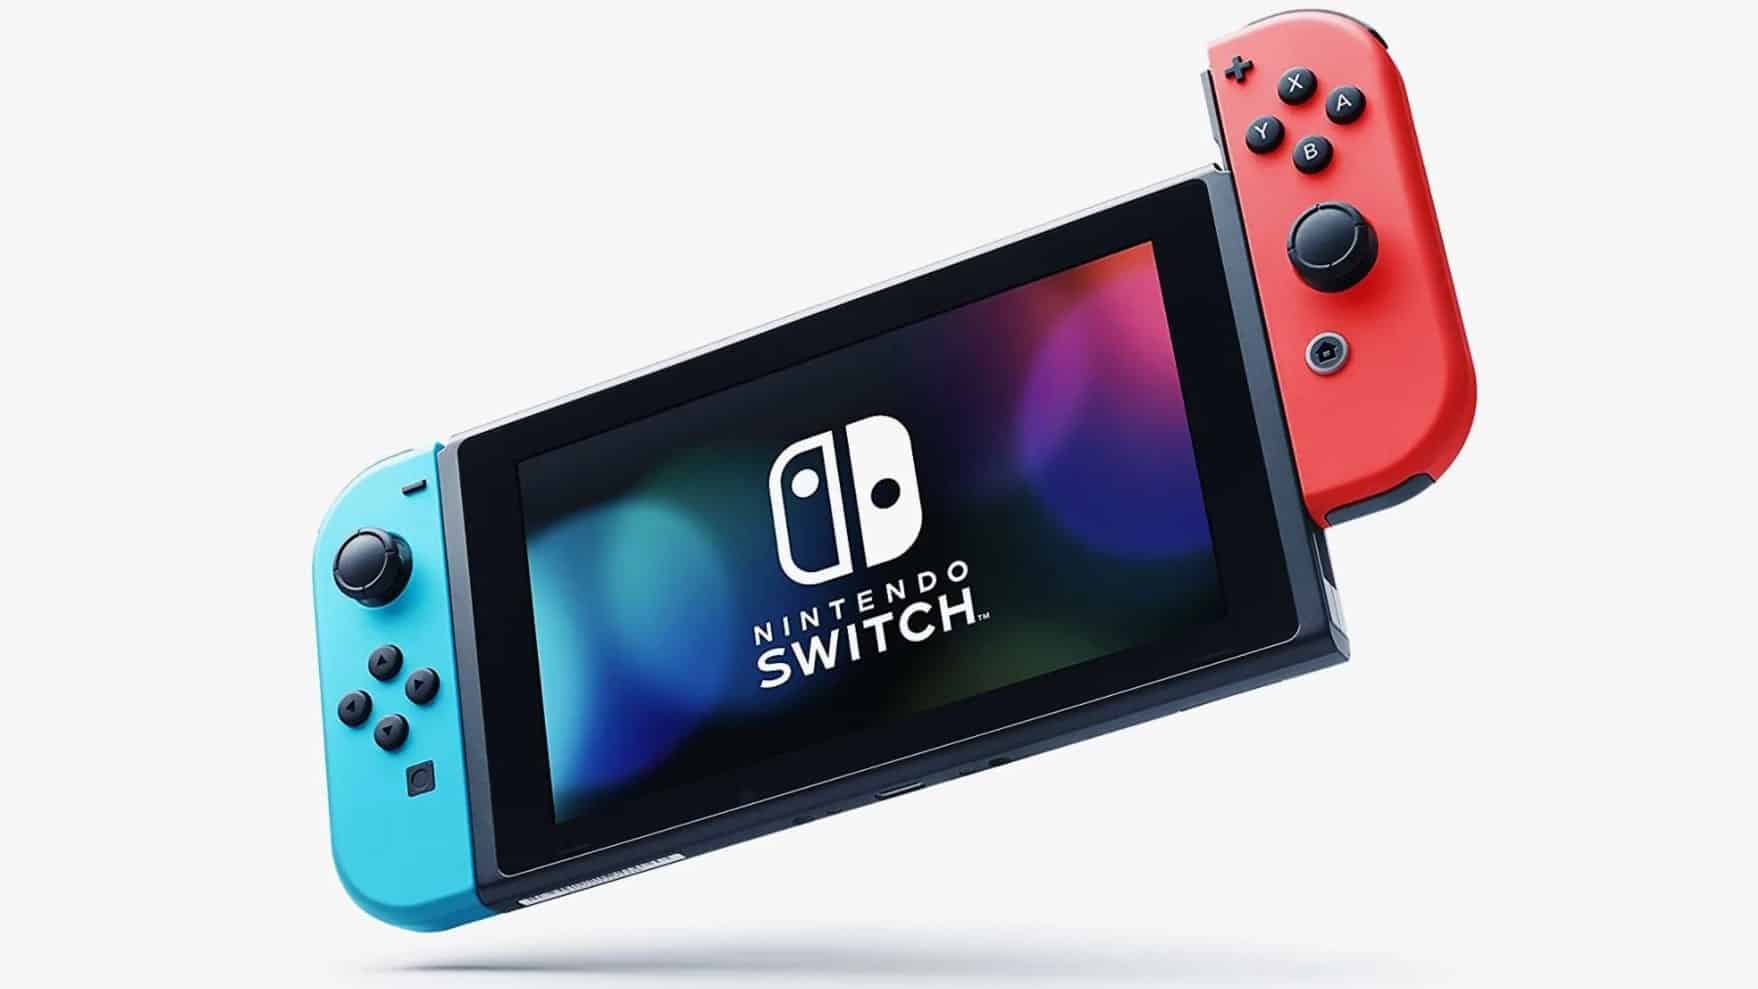 Nintendo Switch - News, Updates, and Information